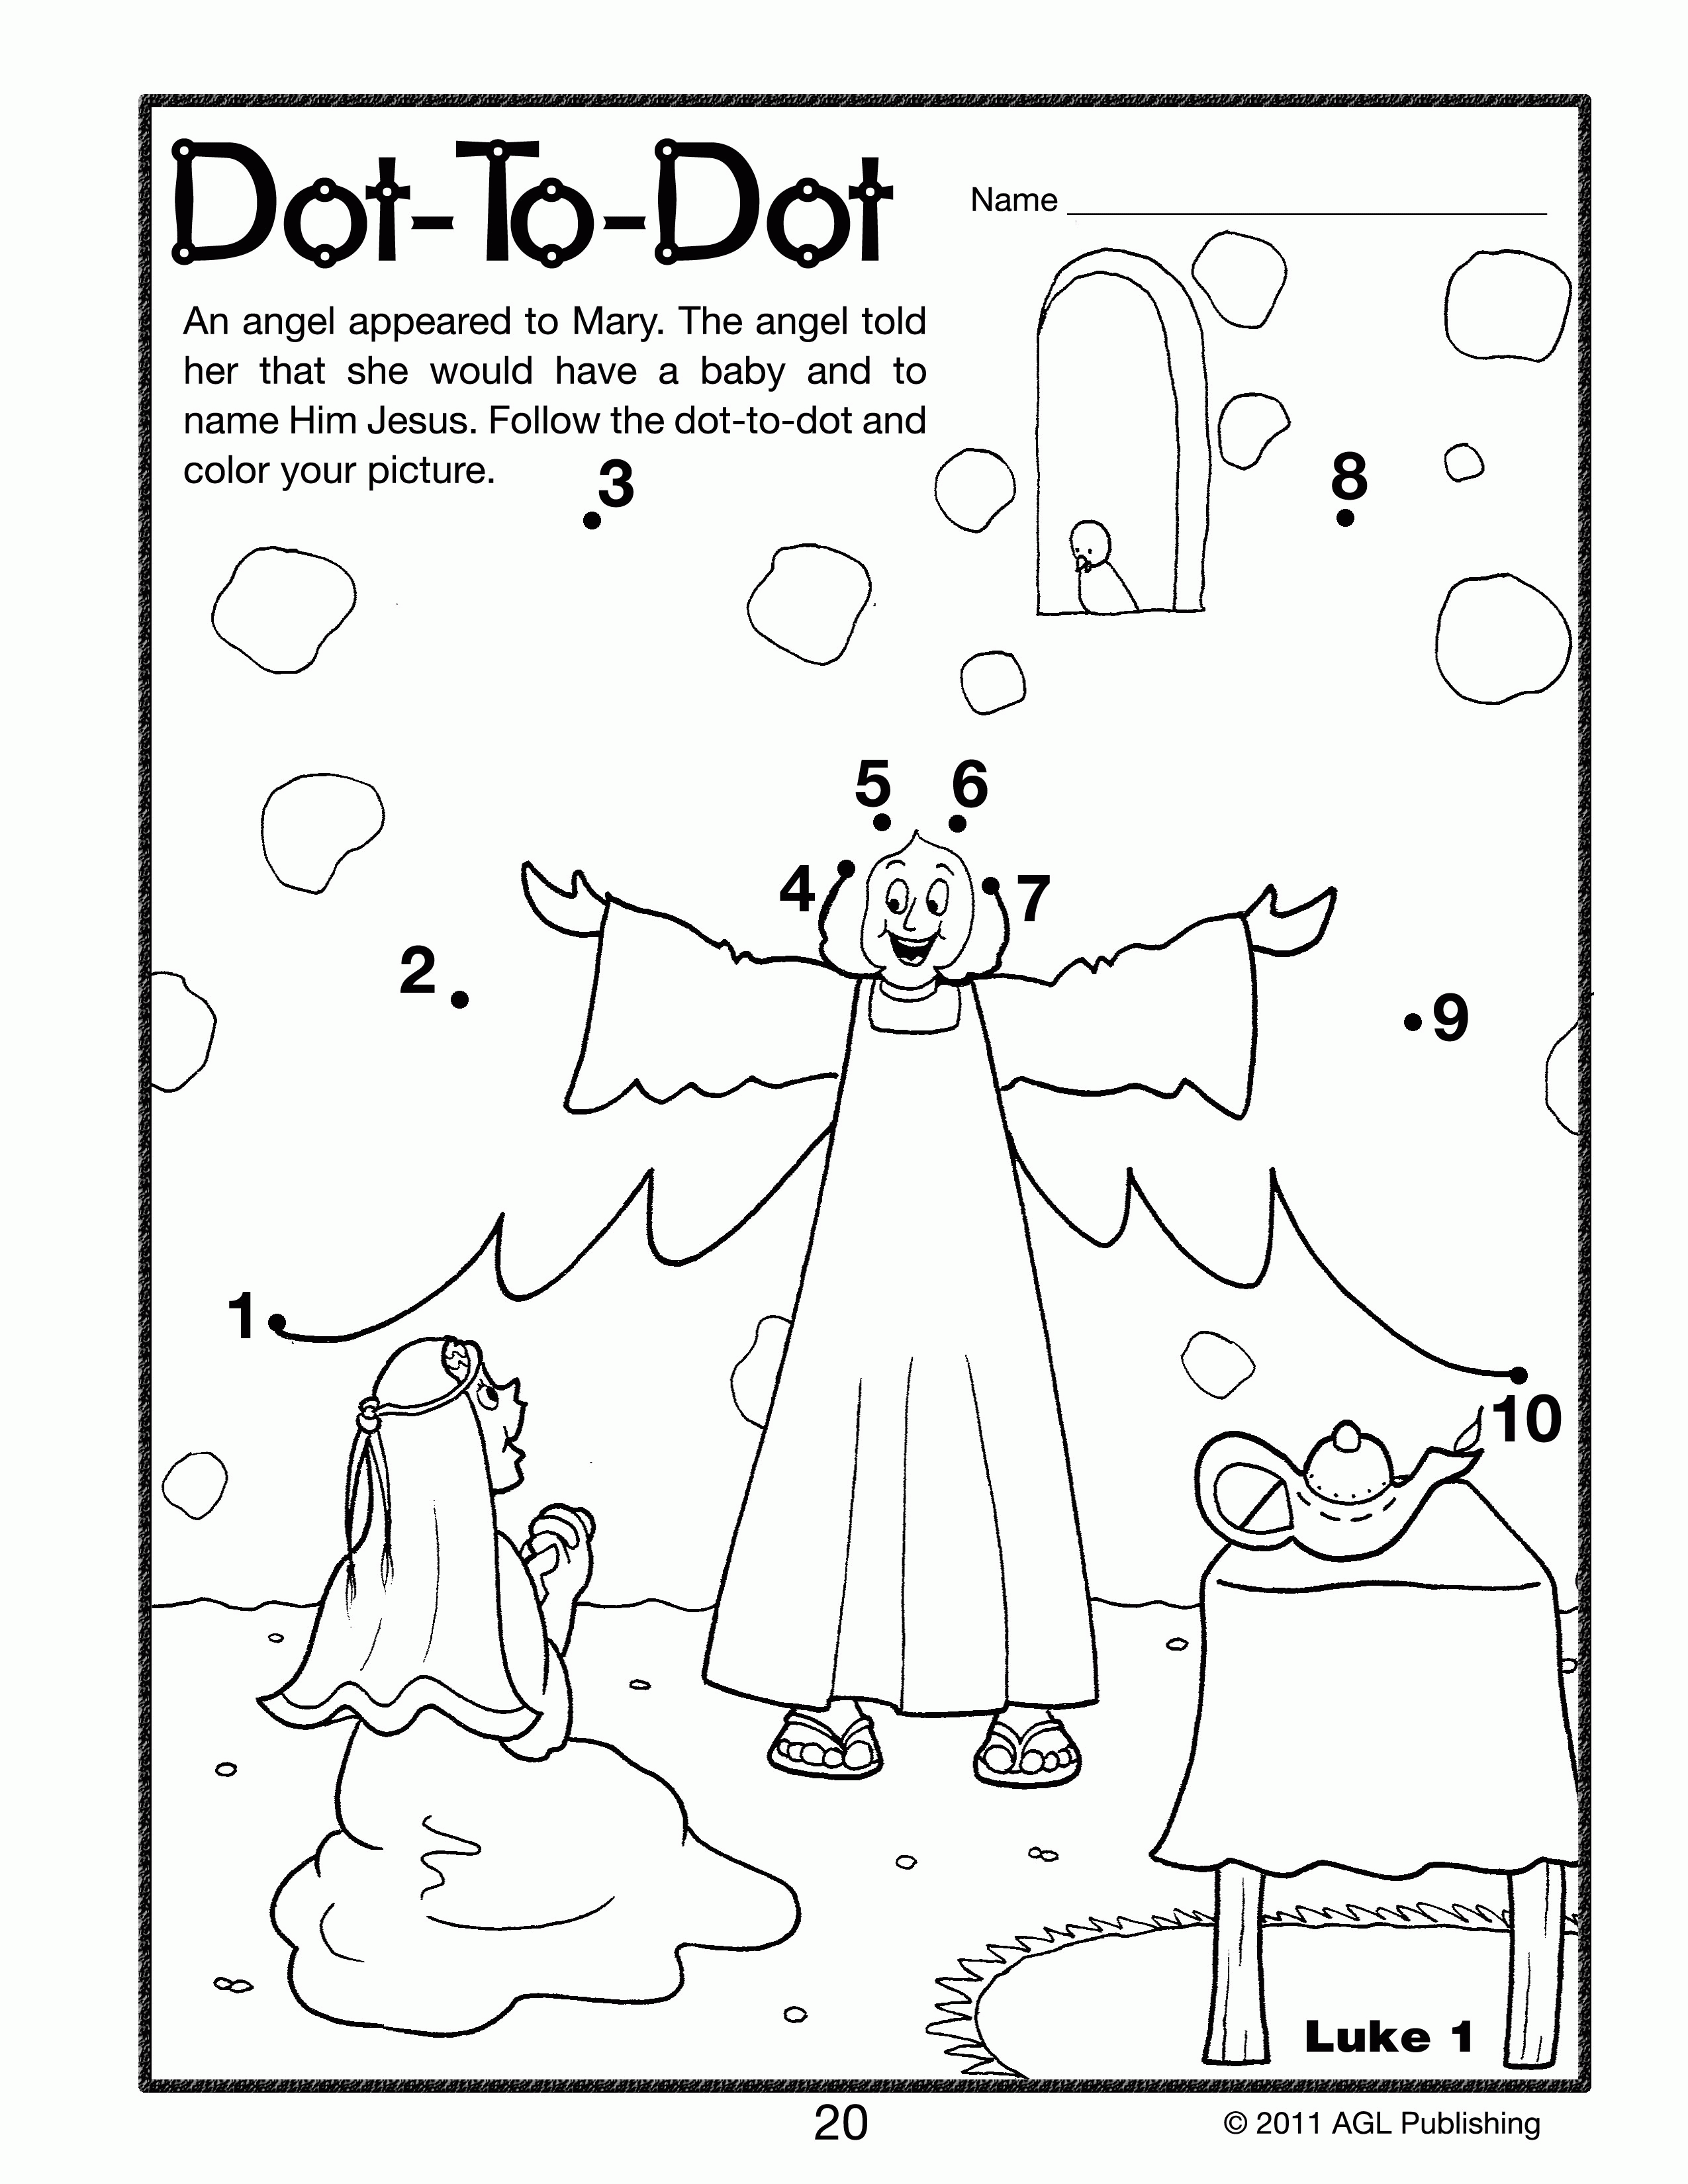 elizabeth and zechariah coloring pages zechariah coloring page coloring home pages coloring zechariah elizabeth and 